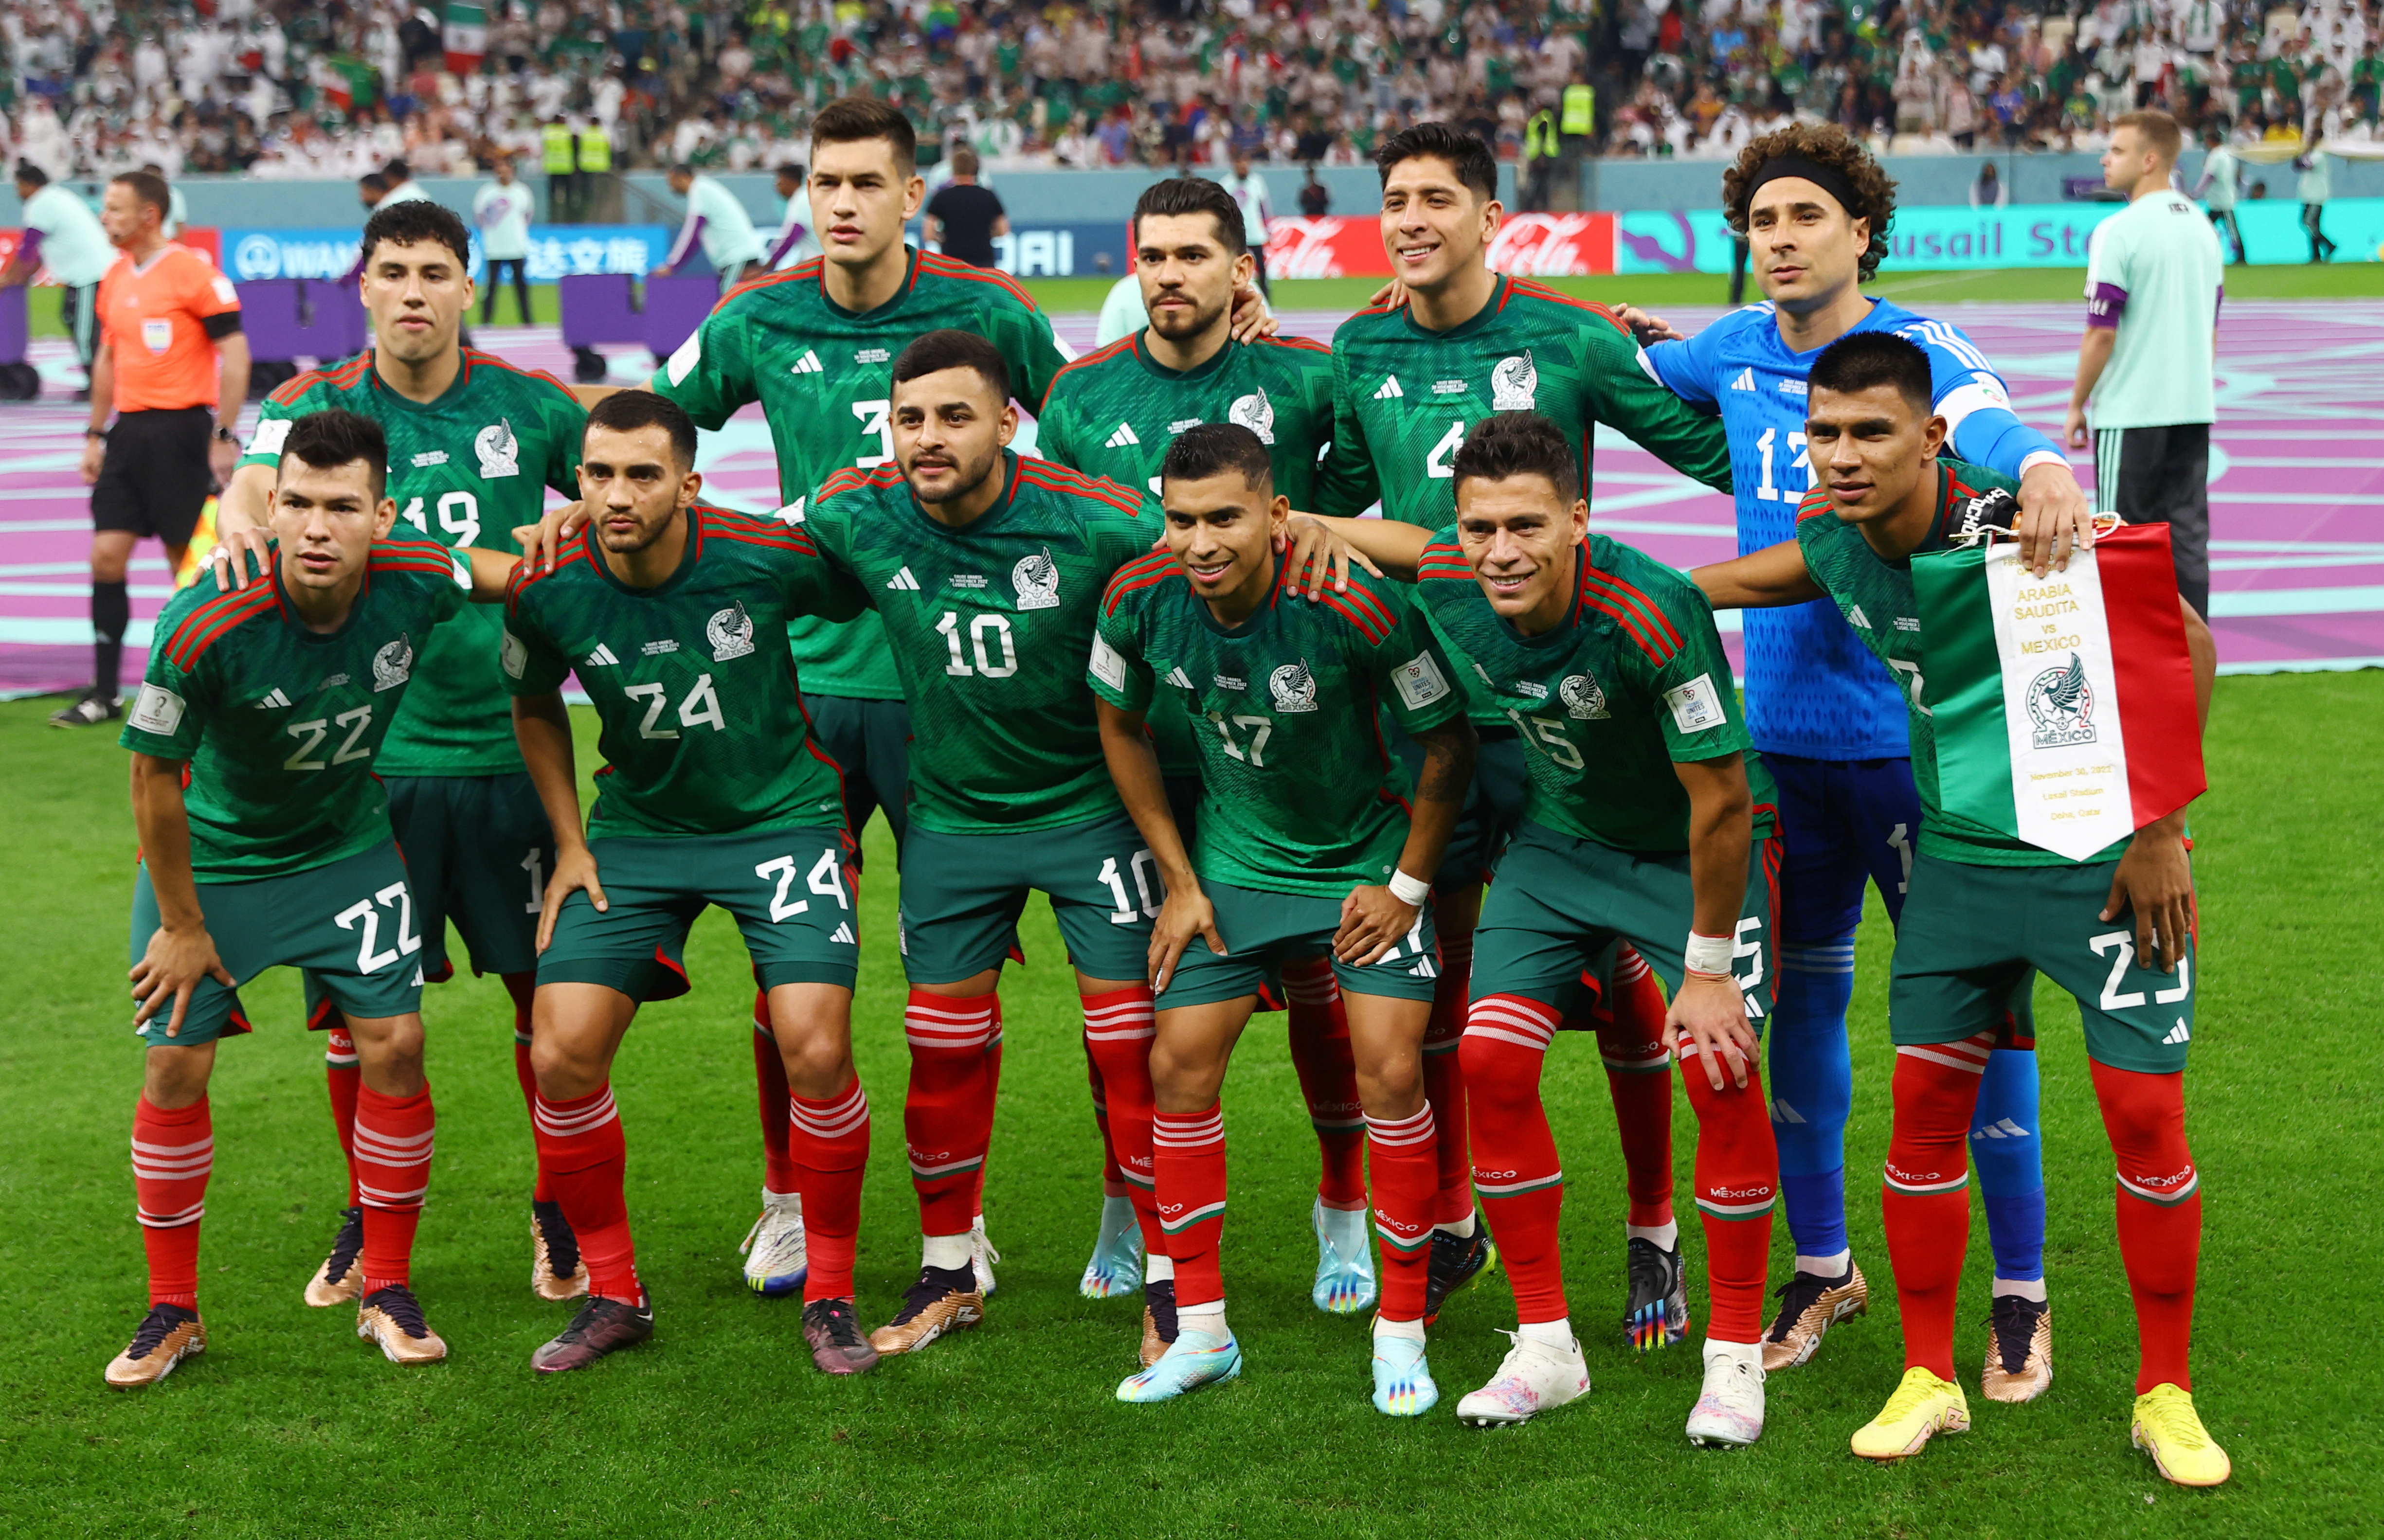 Kick-off for Mexico's eleventh match, in the match against Saudi Arabia, corresponding to the third day of the Qatar 2022 World Cup (Reuters / Matthew Childs)